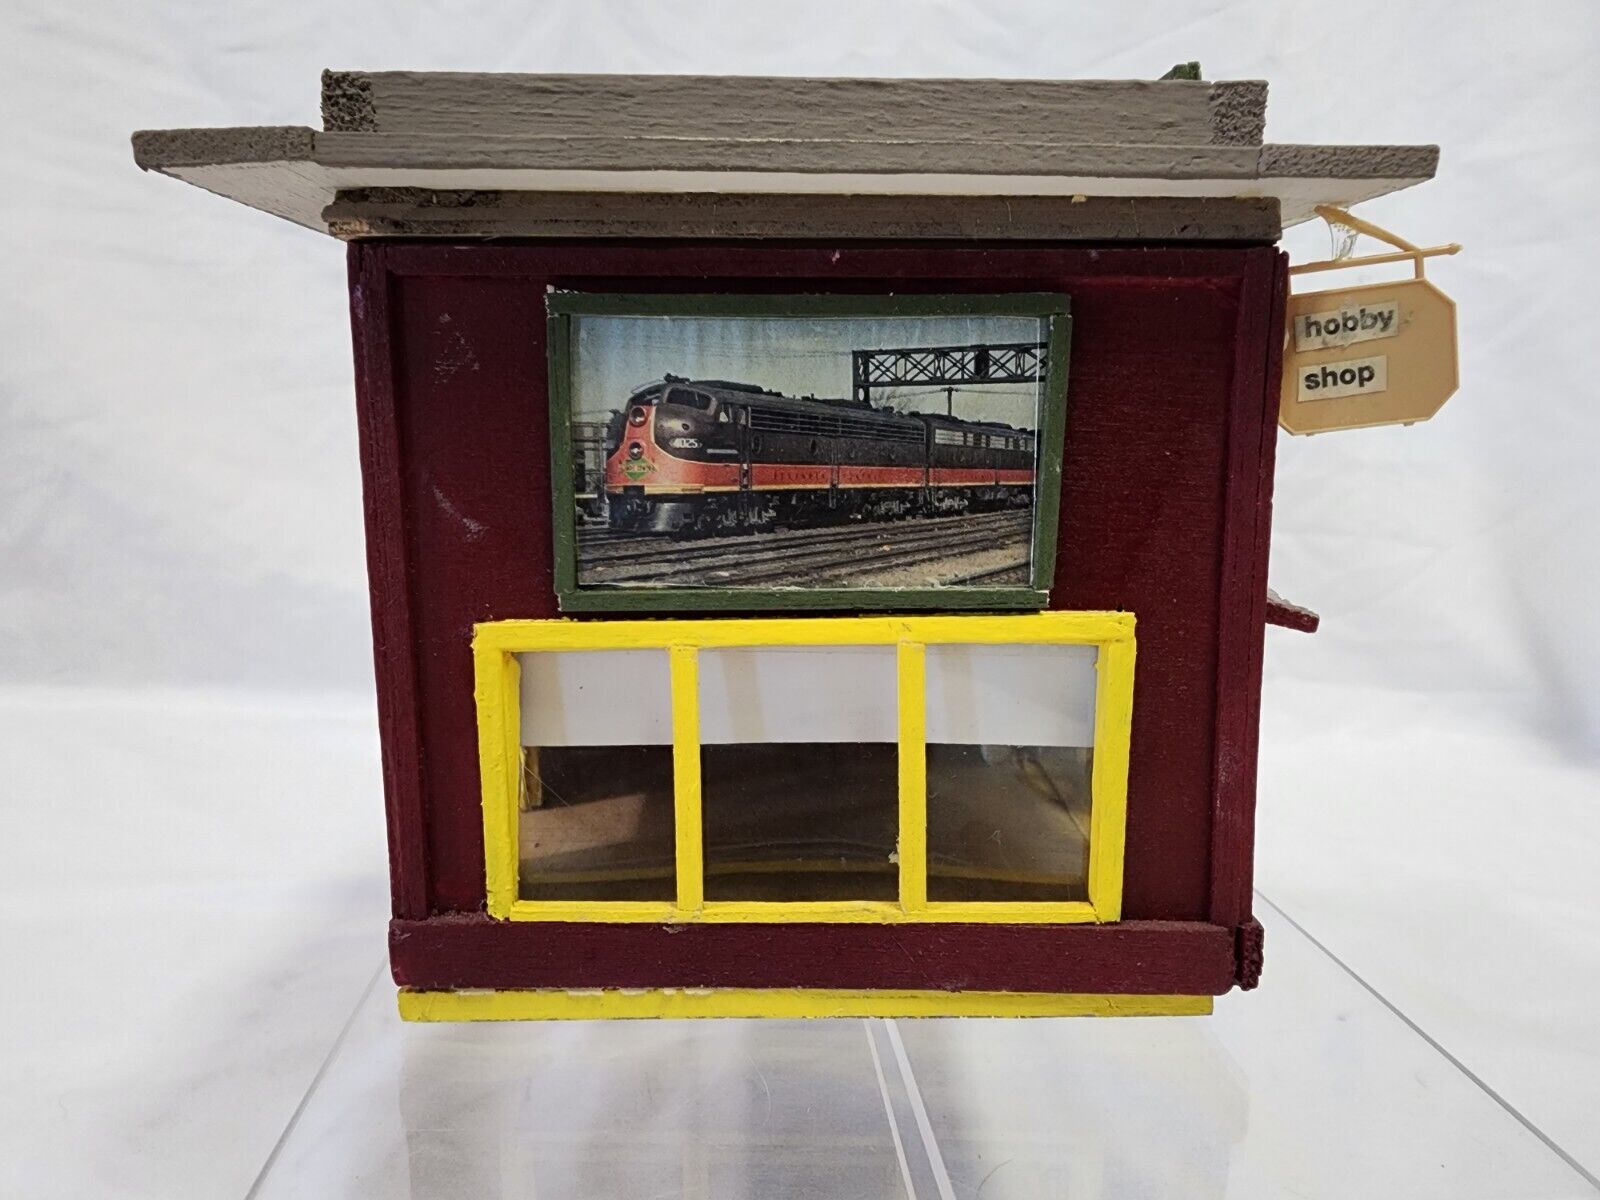 Scratch-Built HO Scale 2-Story Hobby Shop, lighted - 5" x 4.5"